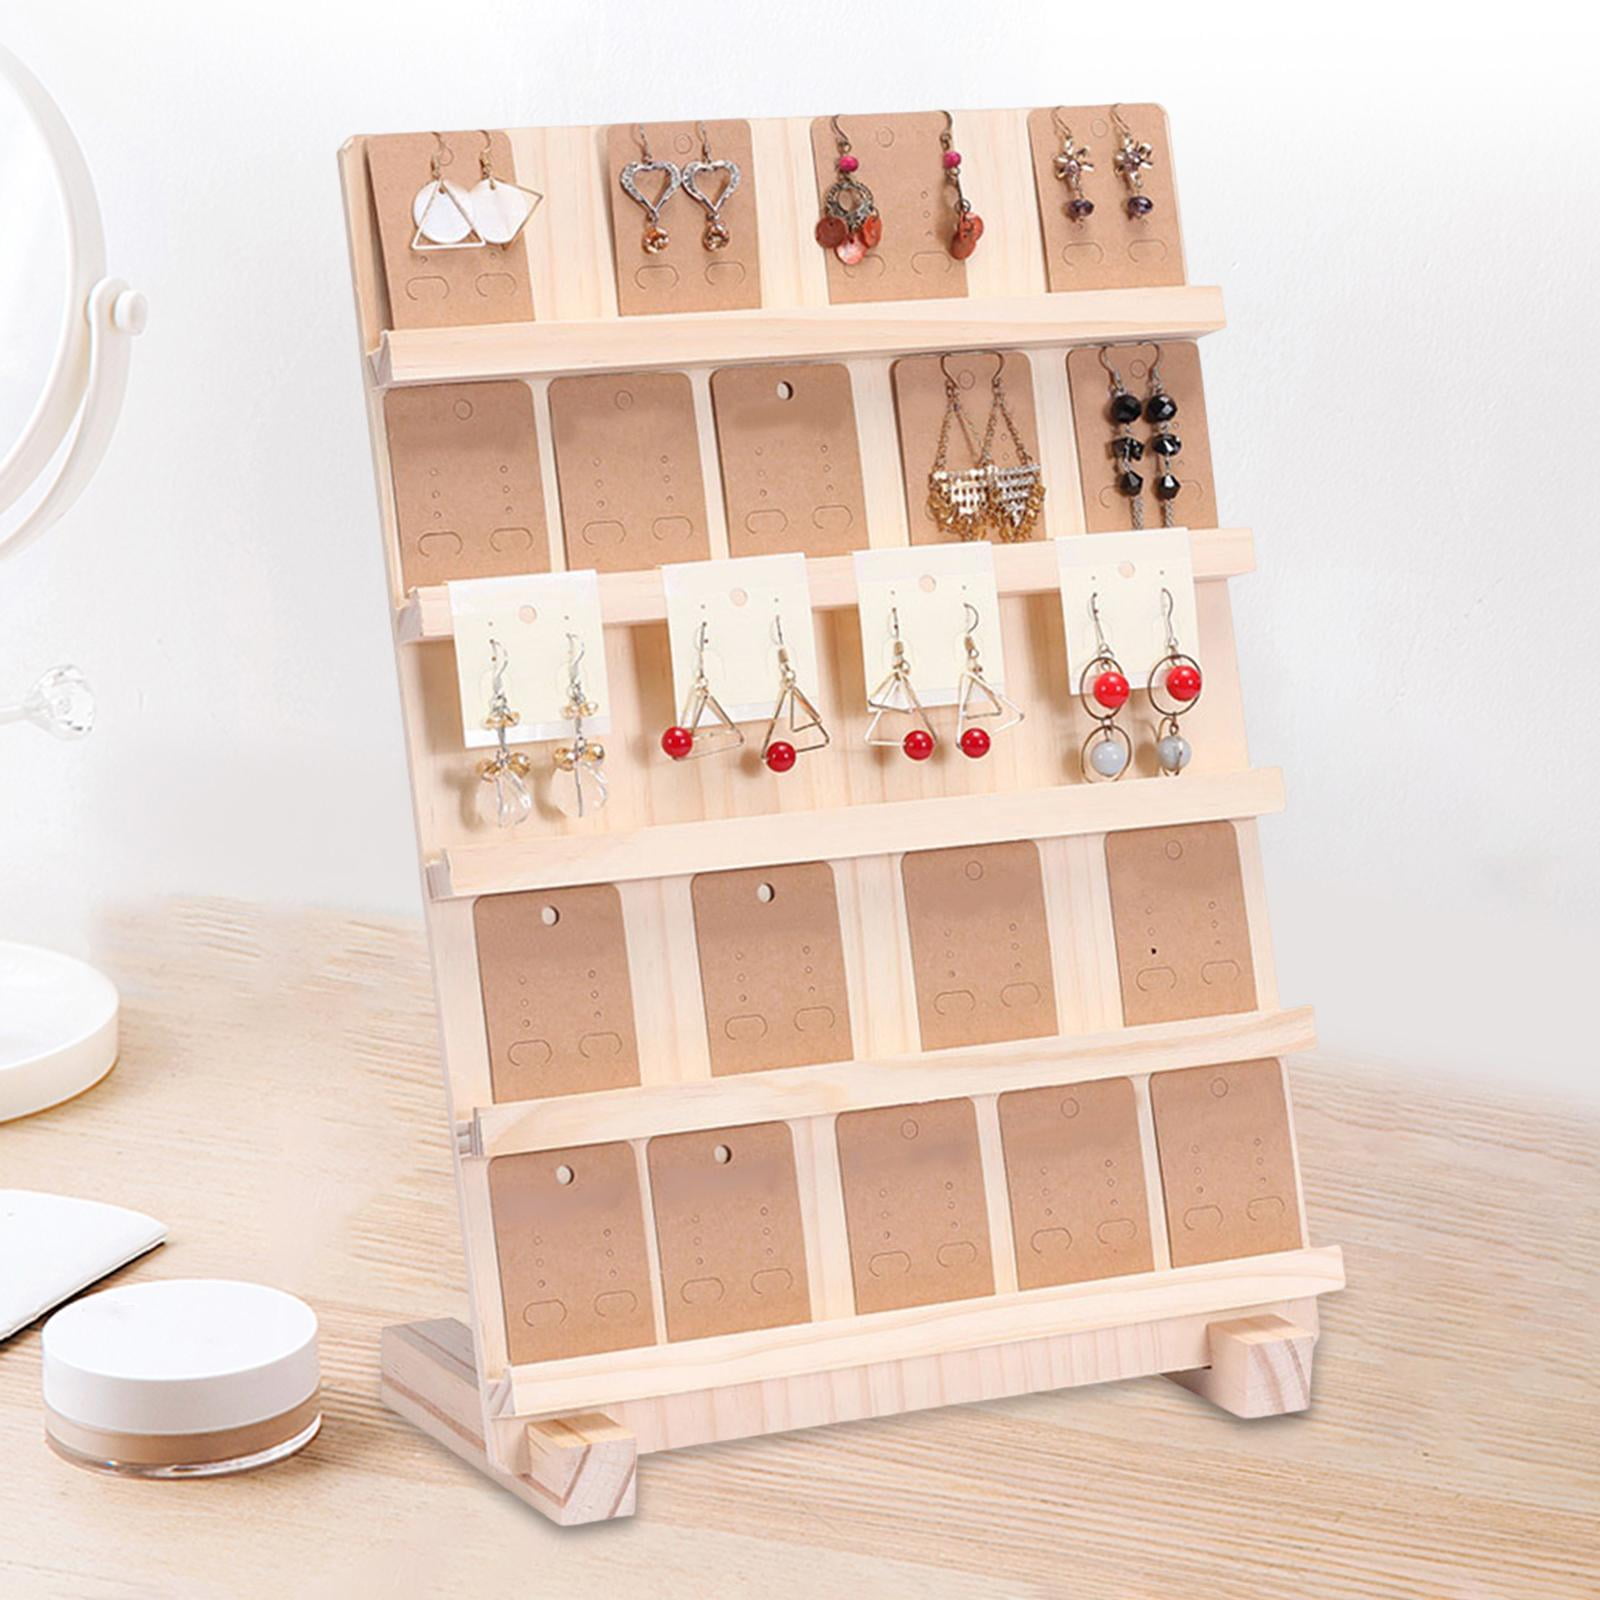 Gransuncy 50 Pcs Natural Wood Earring Display, Portable Wooden Earring Card  Holder Stands with 50pcs Earring Cardboard for Selling Earring, Displaying